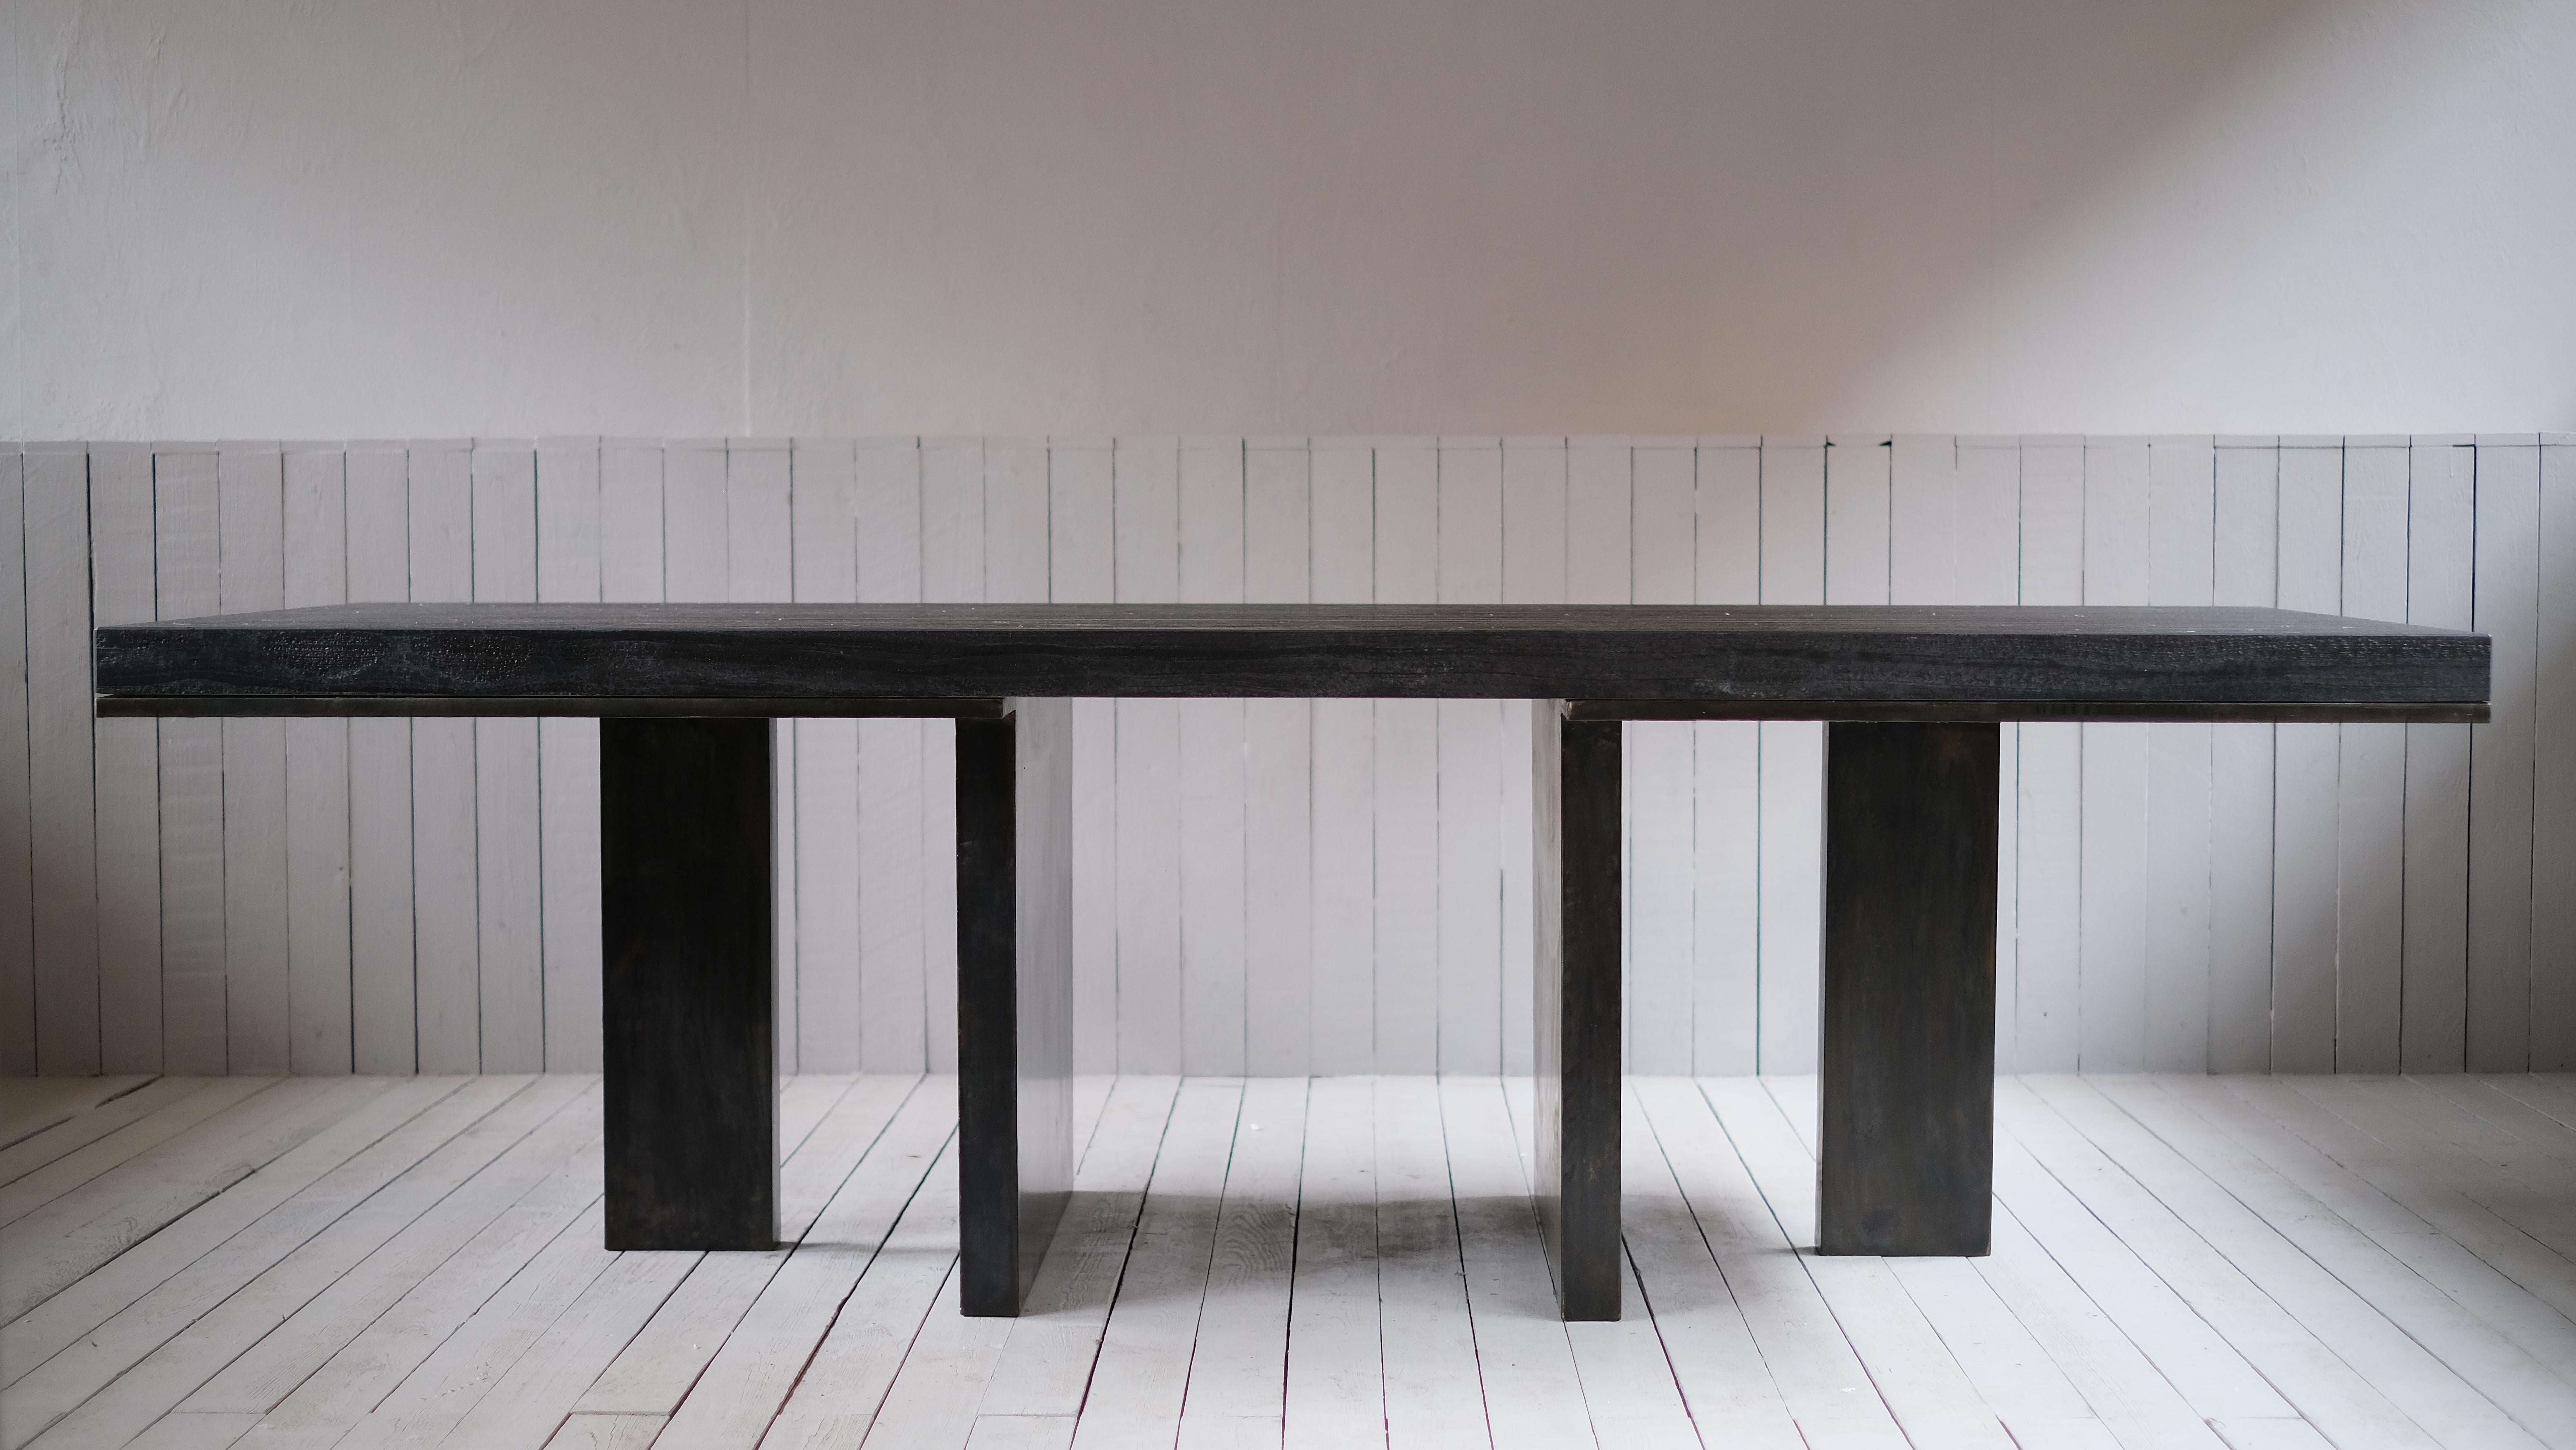 Dining Table by Arno Declercq
Limited Edition of 8
Dimensions: D 210 x W 110 cm x H 75 cm
Materials: Japanese natural stone & patinated steel
Signed by Arno Declercq

Arno Declercq
Belgian designer and art dealer who makes bespoke objects with